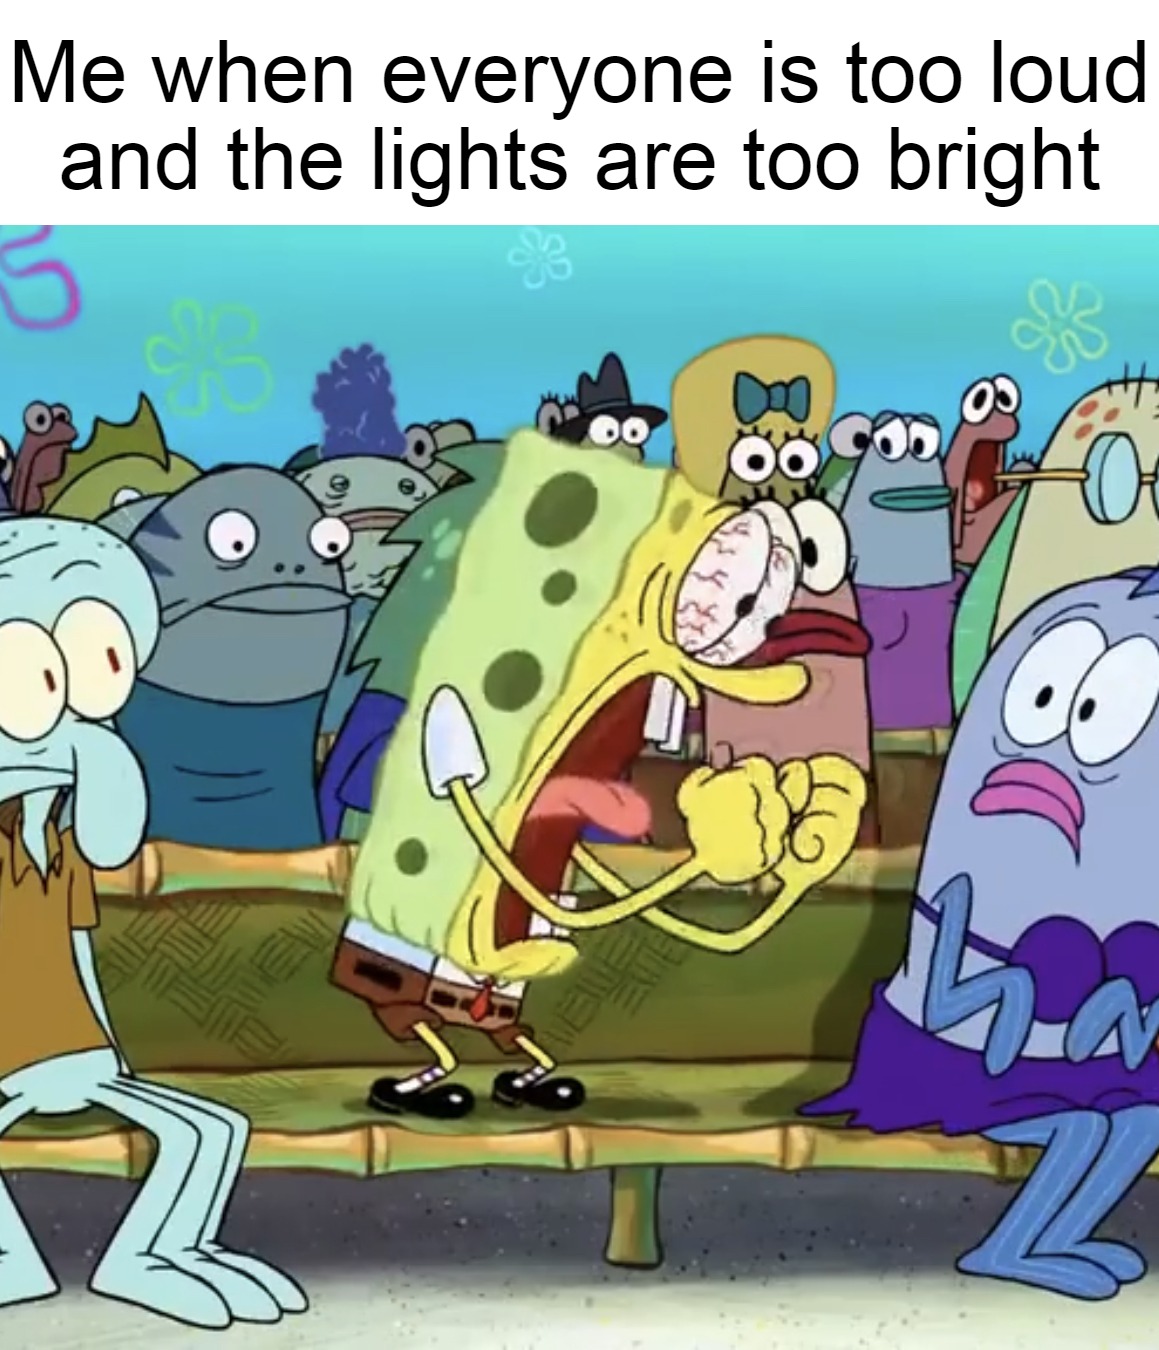 Spongebob Yelling | Me when everyone is too loud and the lights are too bright | image tagged in spongebob yelling,meme,memes | made w/ Imgflip meme maker